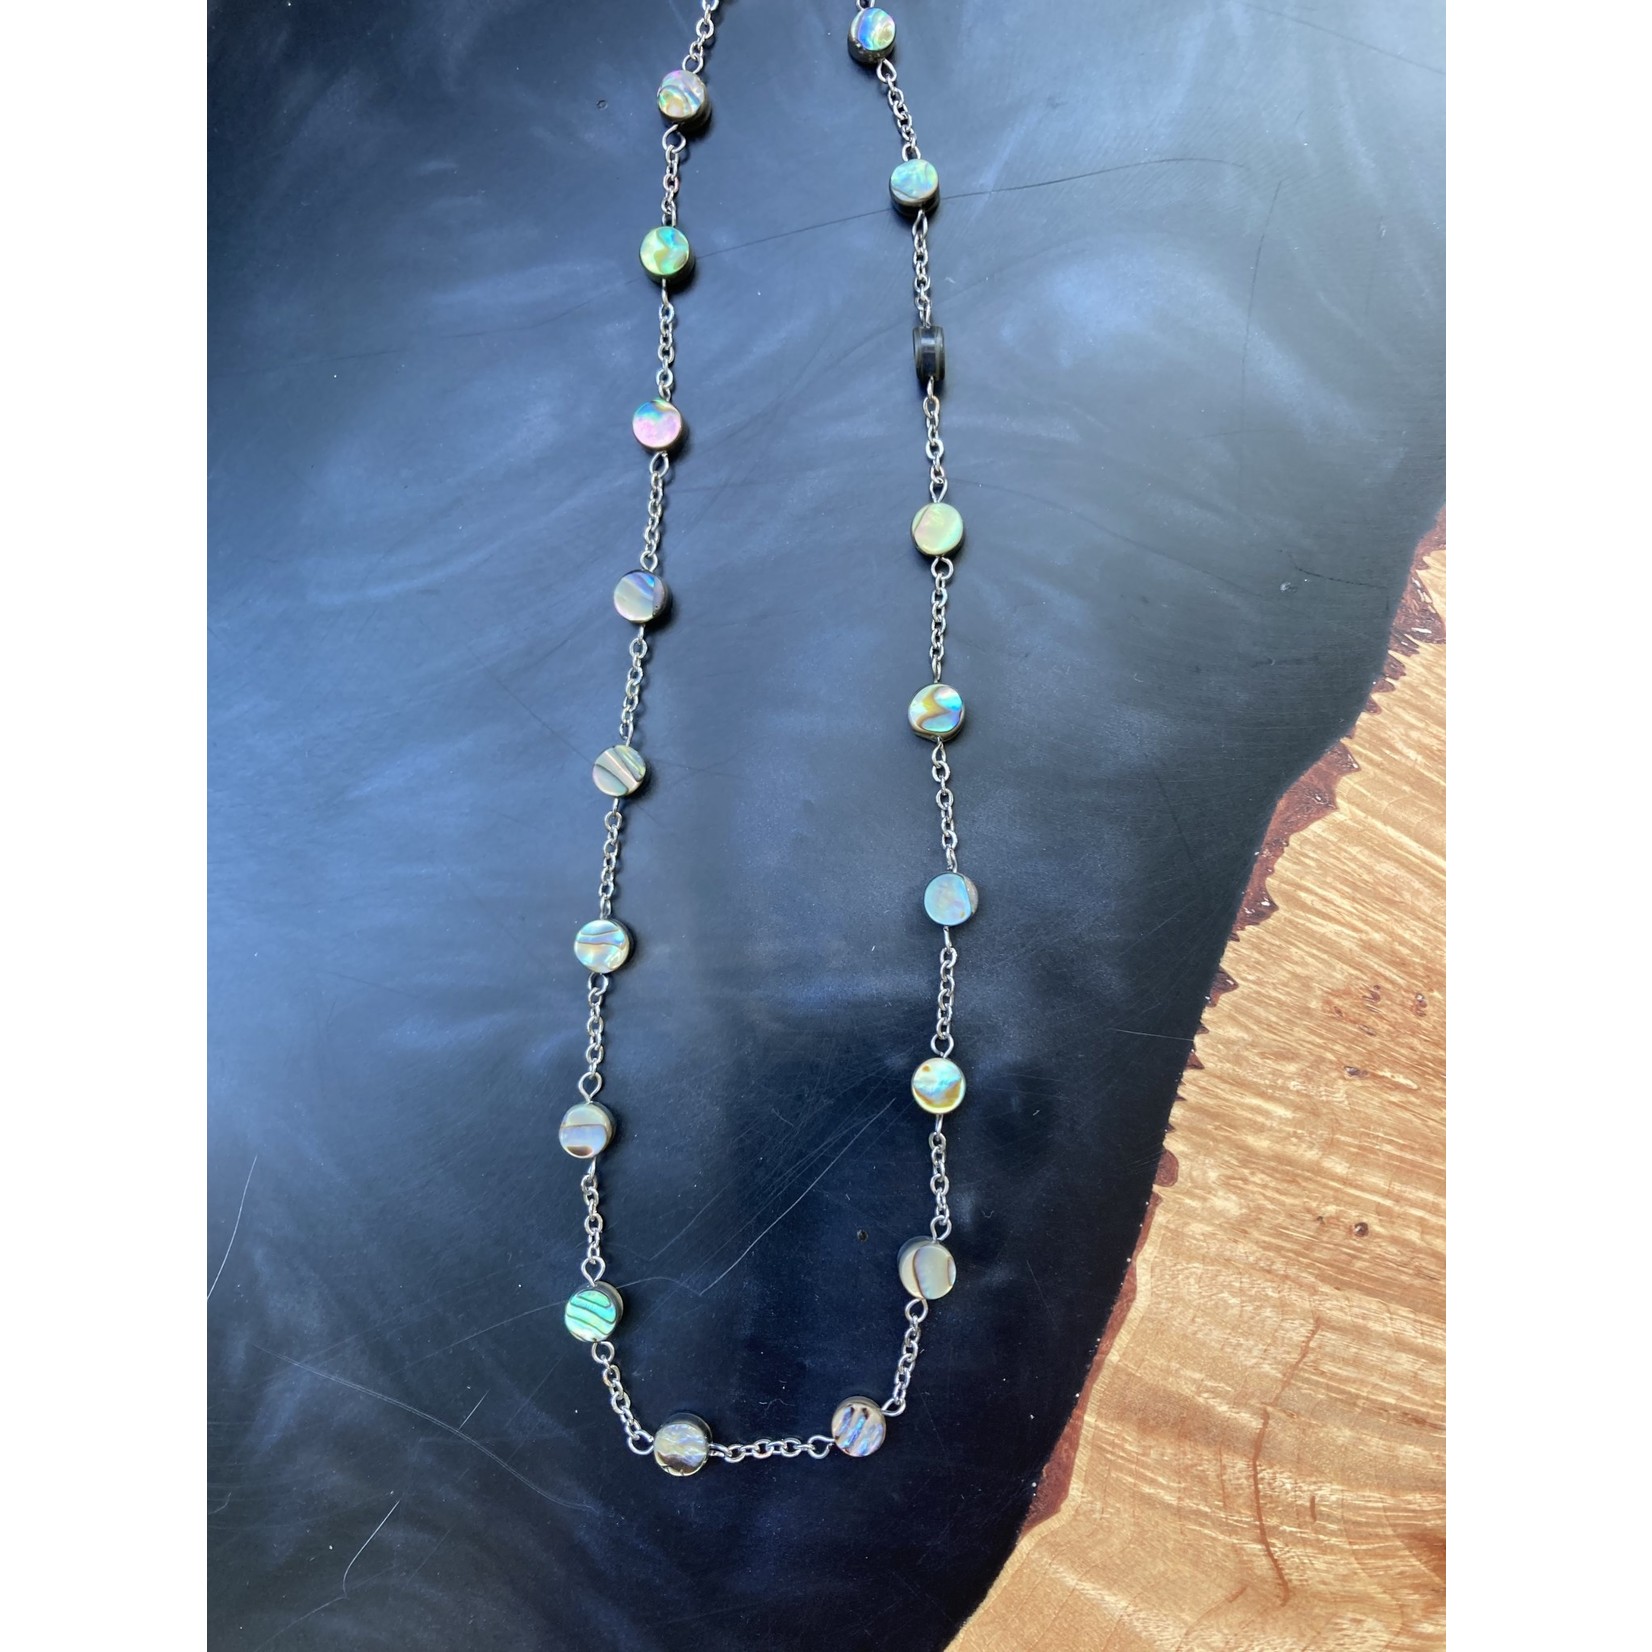 Colleen Hirsh Colleen Hirsh #186 Abalone Shell necklace